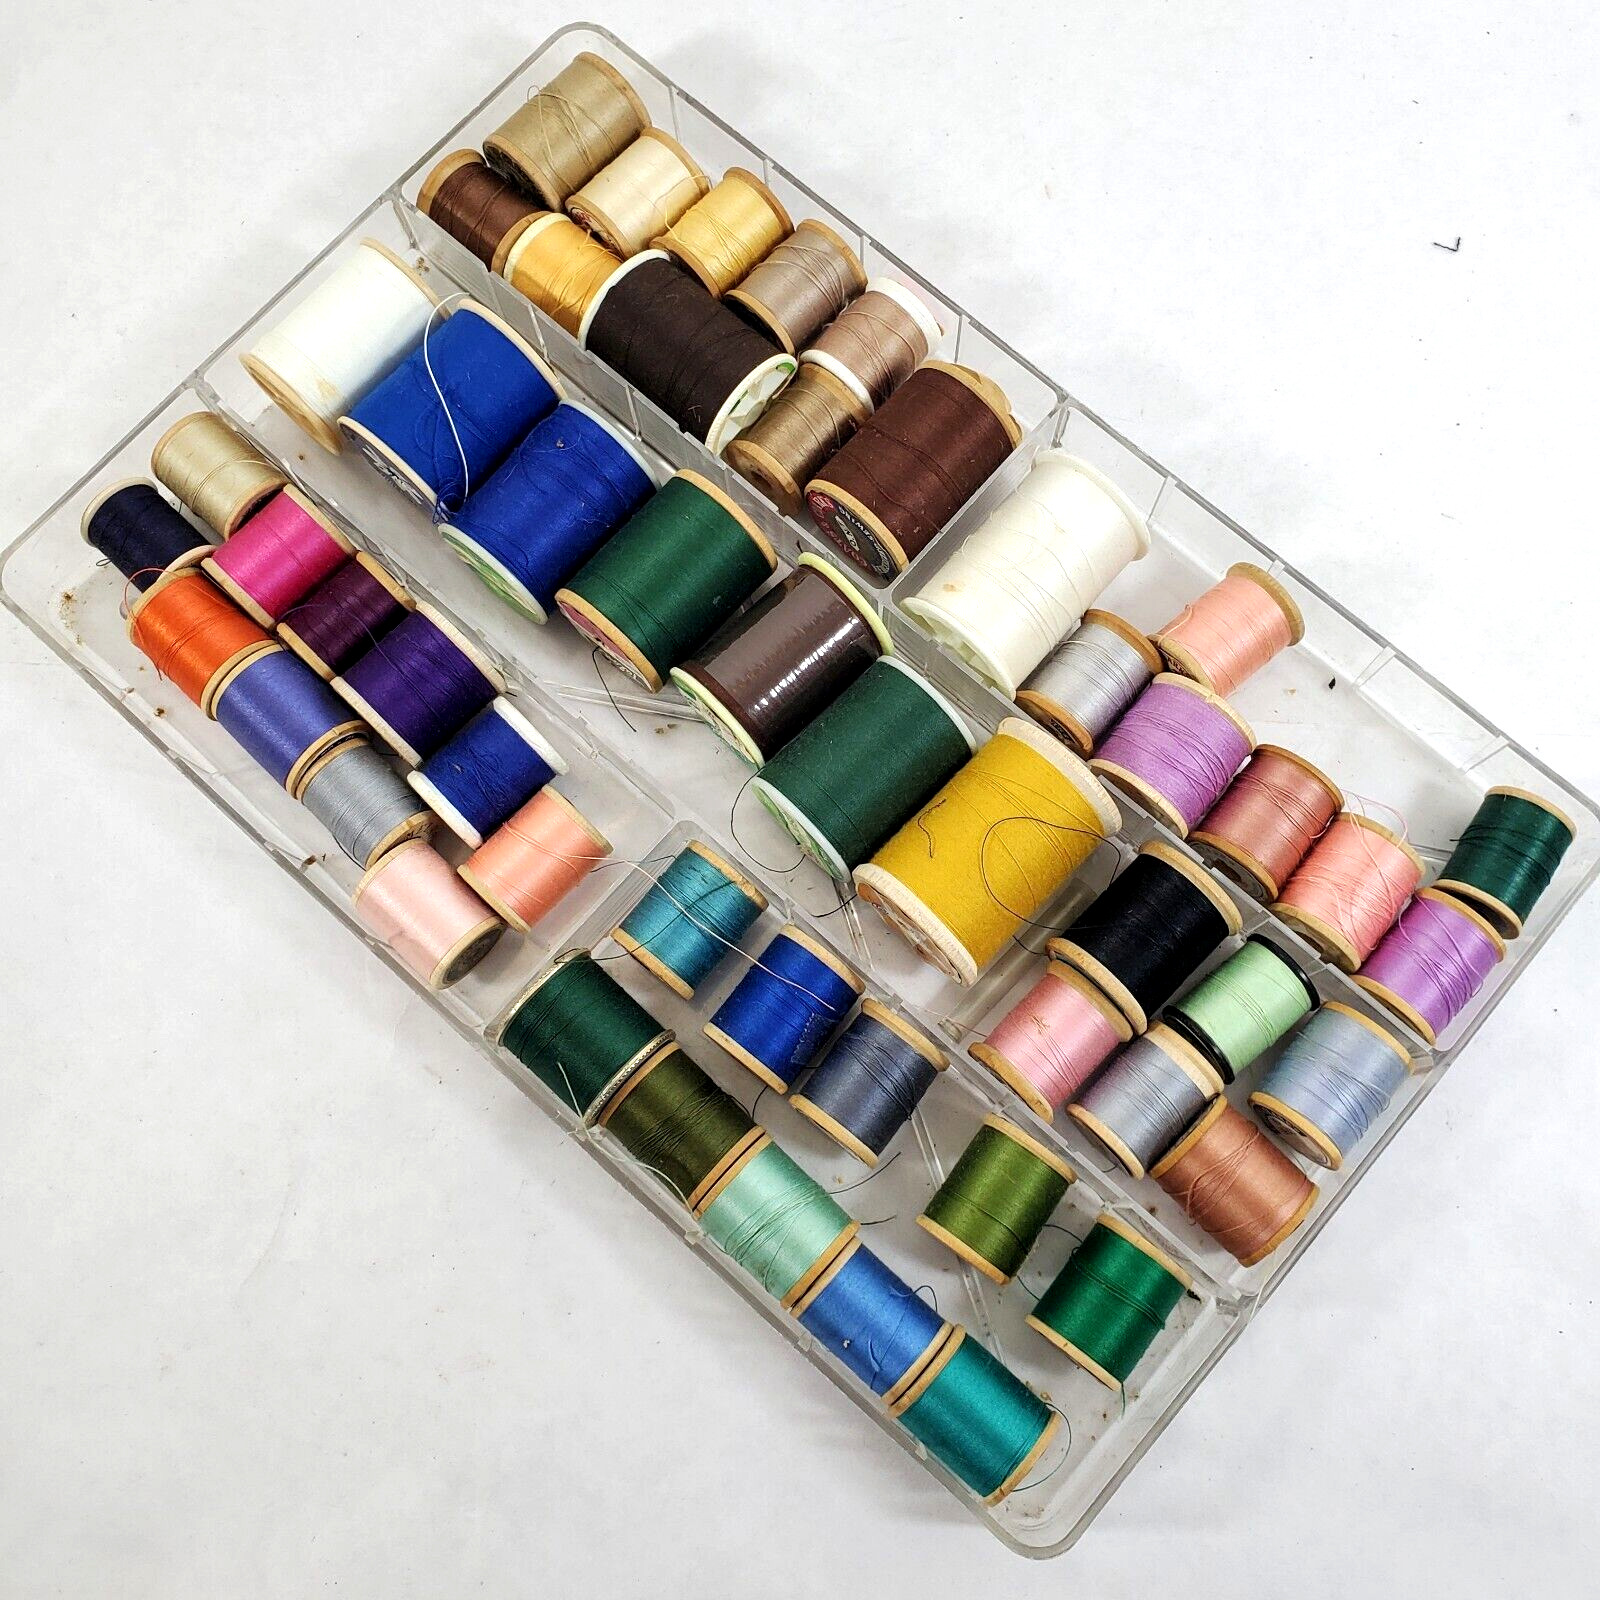 Mixed Lot of 50 Vintage Wood Sewing Thread Spools Various Colors & Sizes w Tray